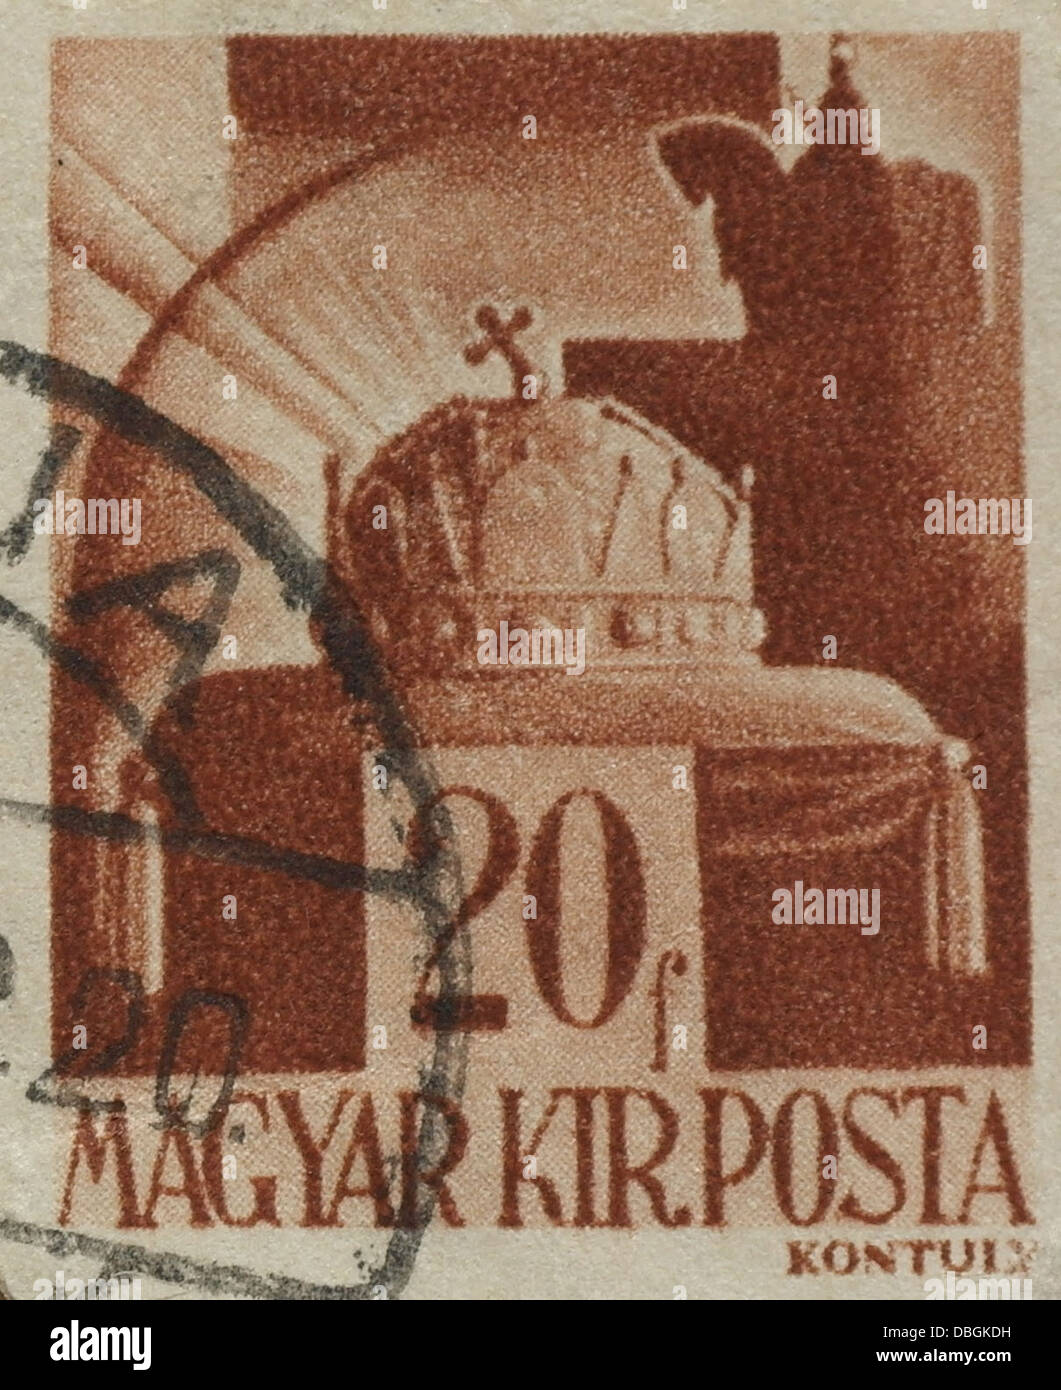 Brown 20 filler Magyar Kiralyi Posta 'Holy Crown of Hungary' postage stamp, Liberation of Hungary Series, issued Budapest, 1945 Stock Photo